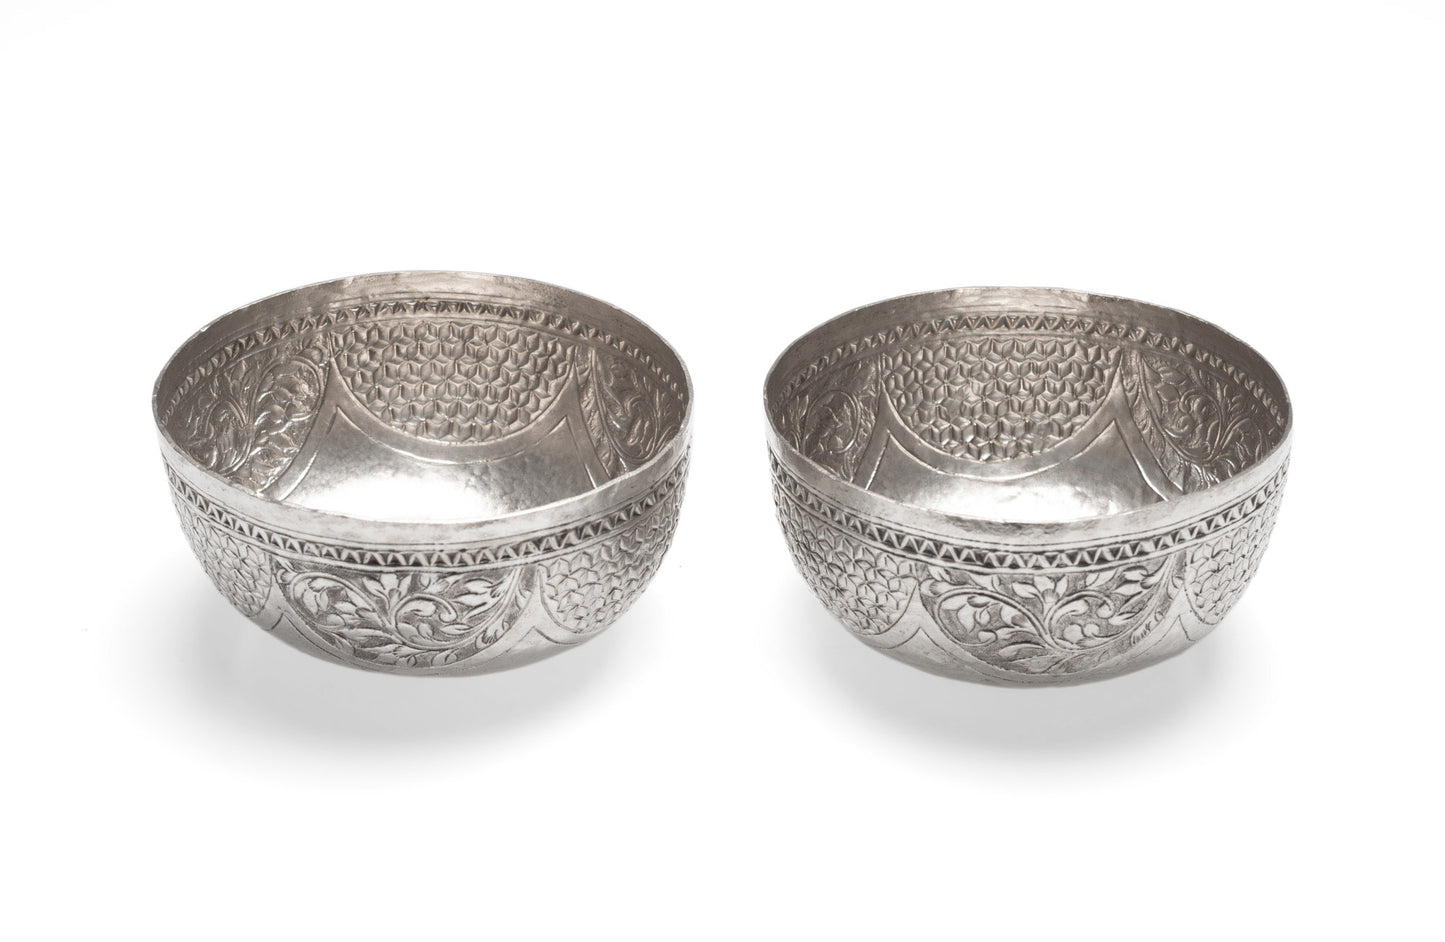 Pair Antique Indian Sterling Silver Repousse Bowls for Foliate Patterns c1880 (Code 2407)